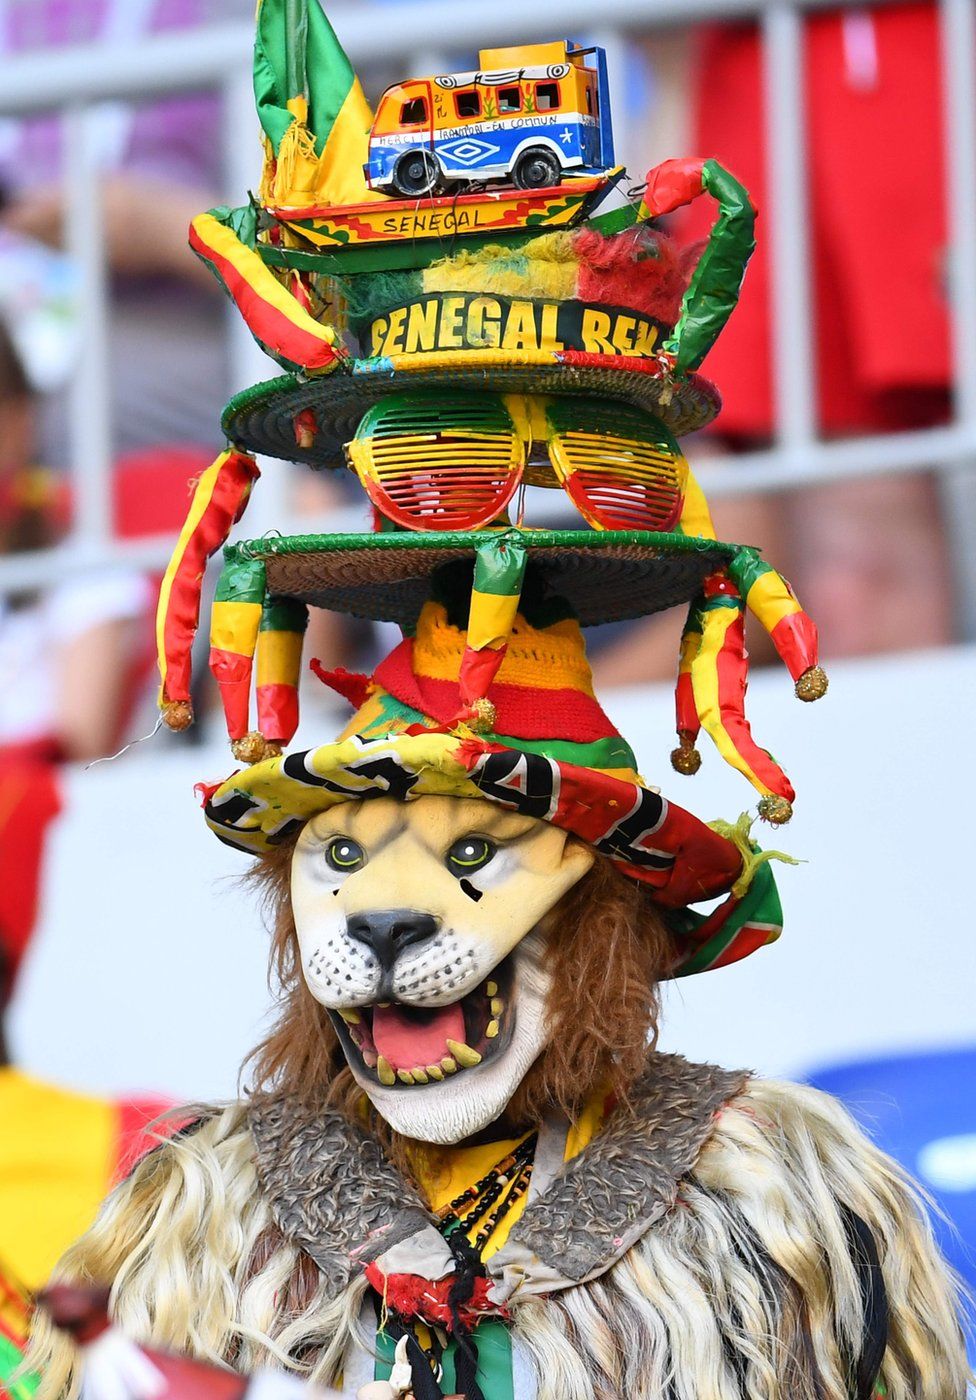 A Senegal fan cheers prior to the Russia 2018 World Cup Group H football match between Senegal and Colombia at the Samara Arena in Samara on June 28, 2018.